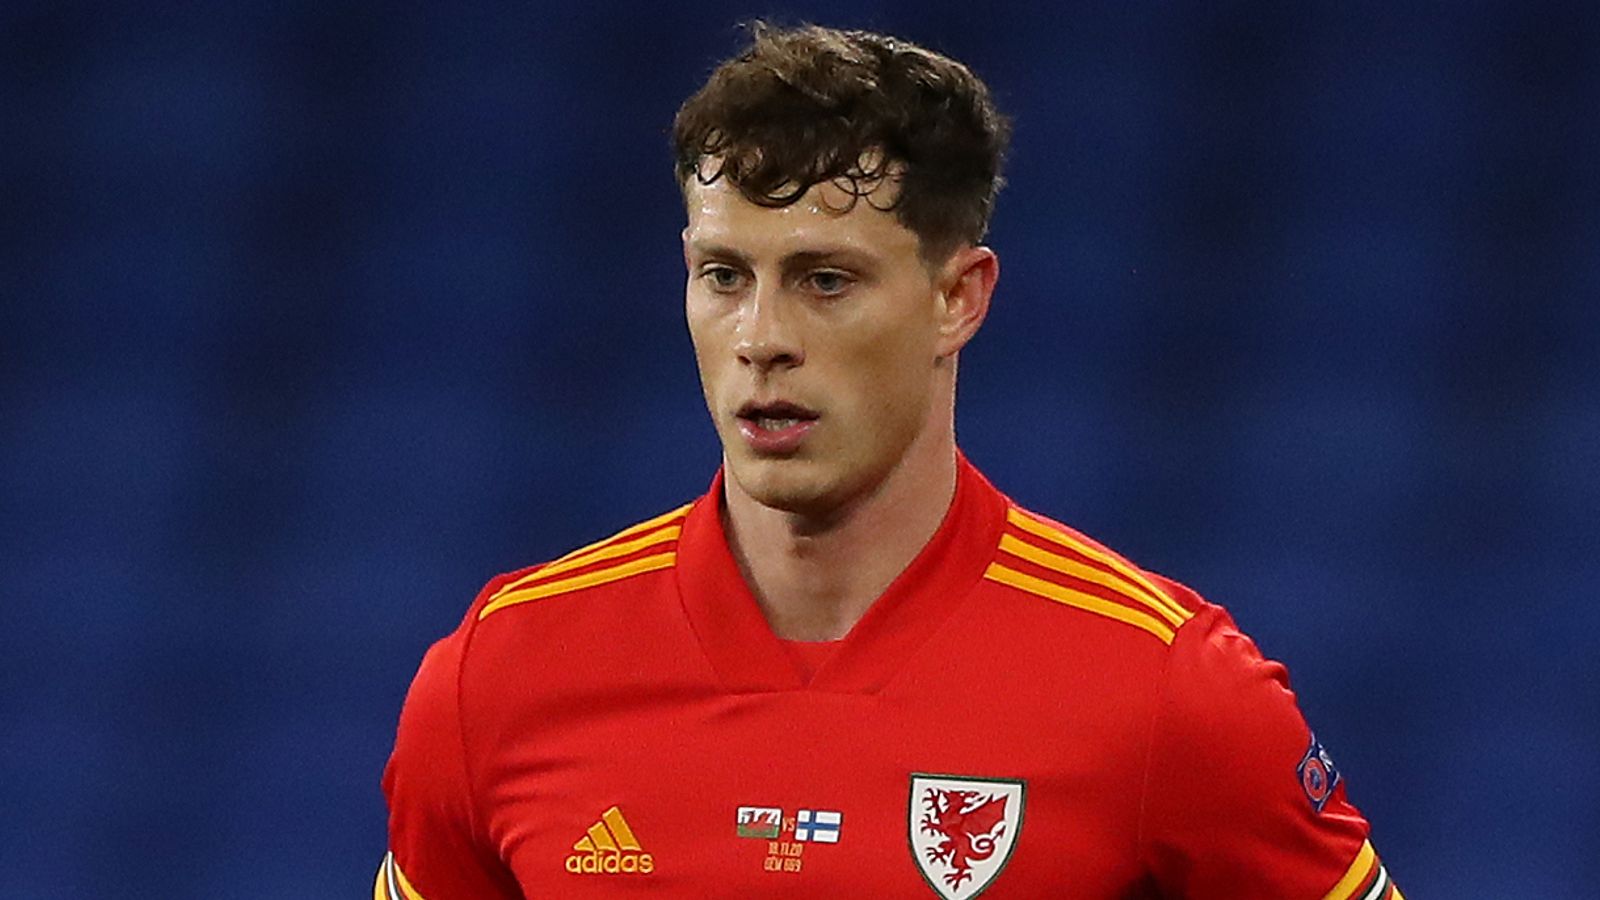 2022 World Cup Qualifiers: Wales demand James Lawrence is released by